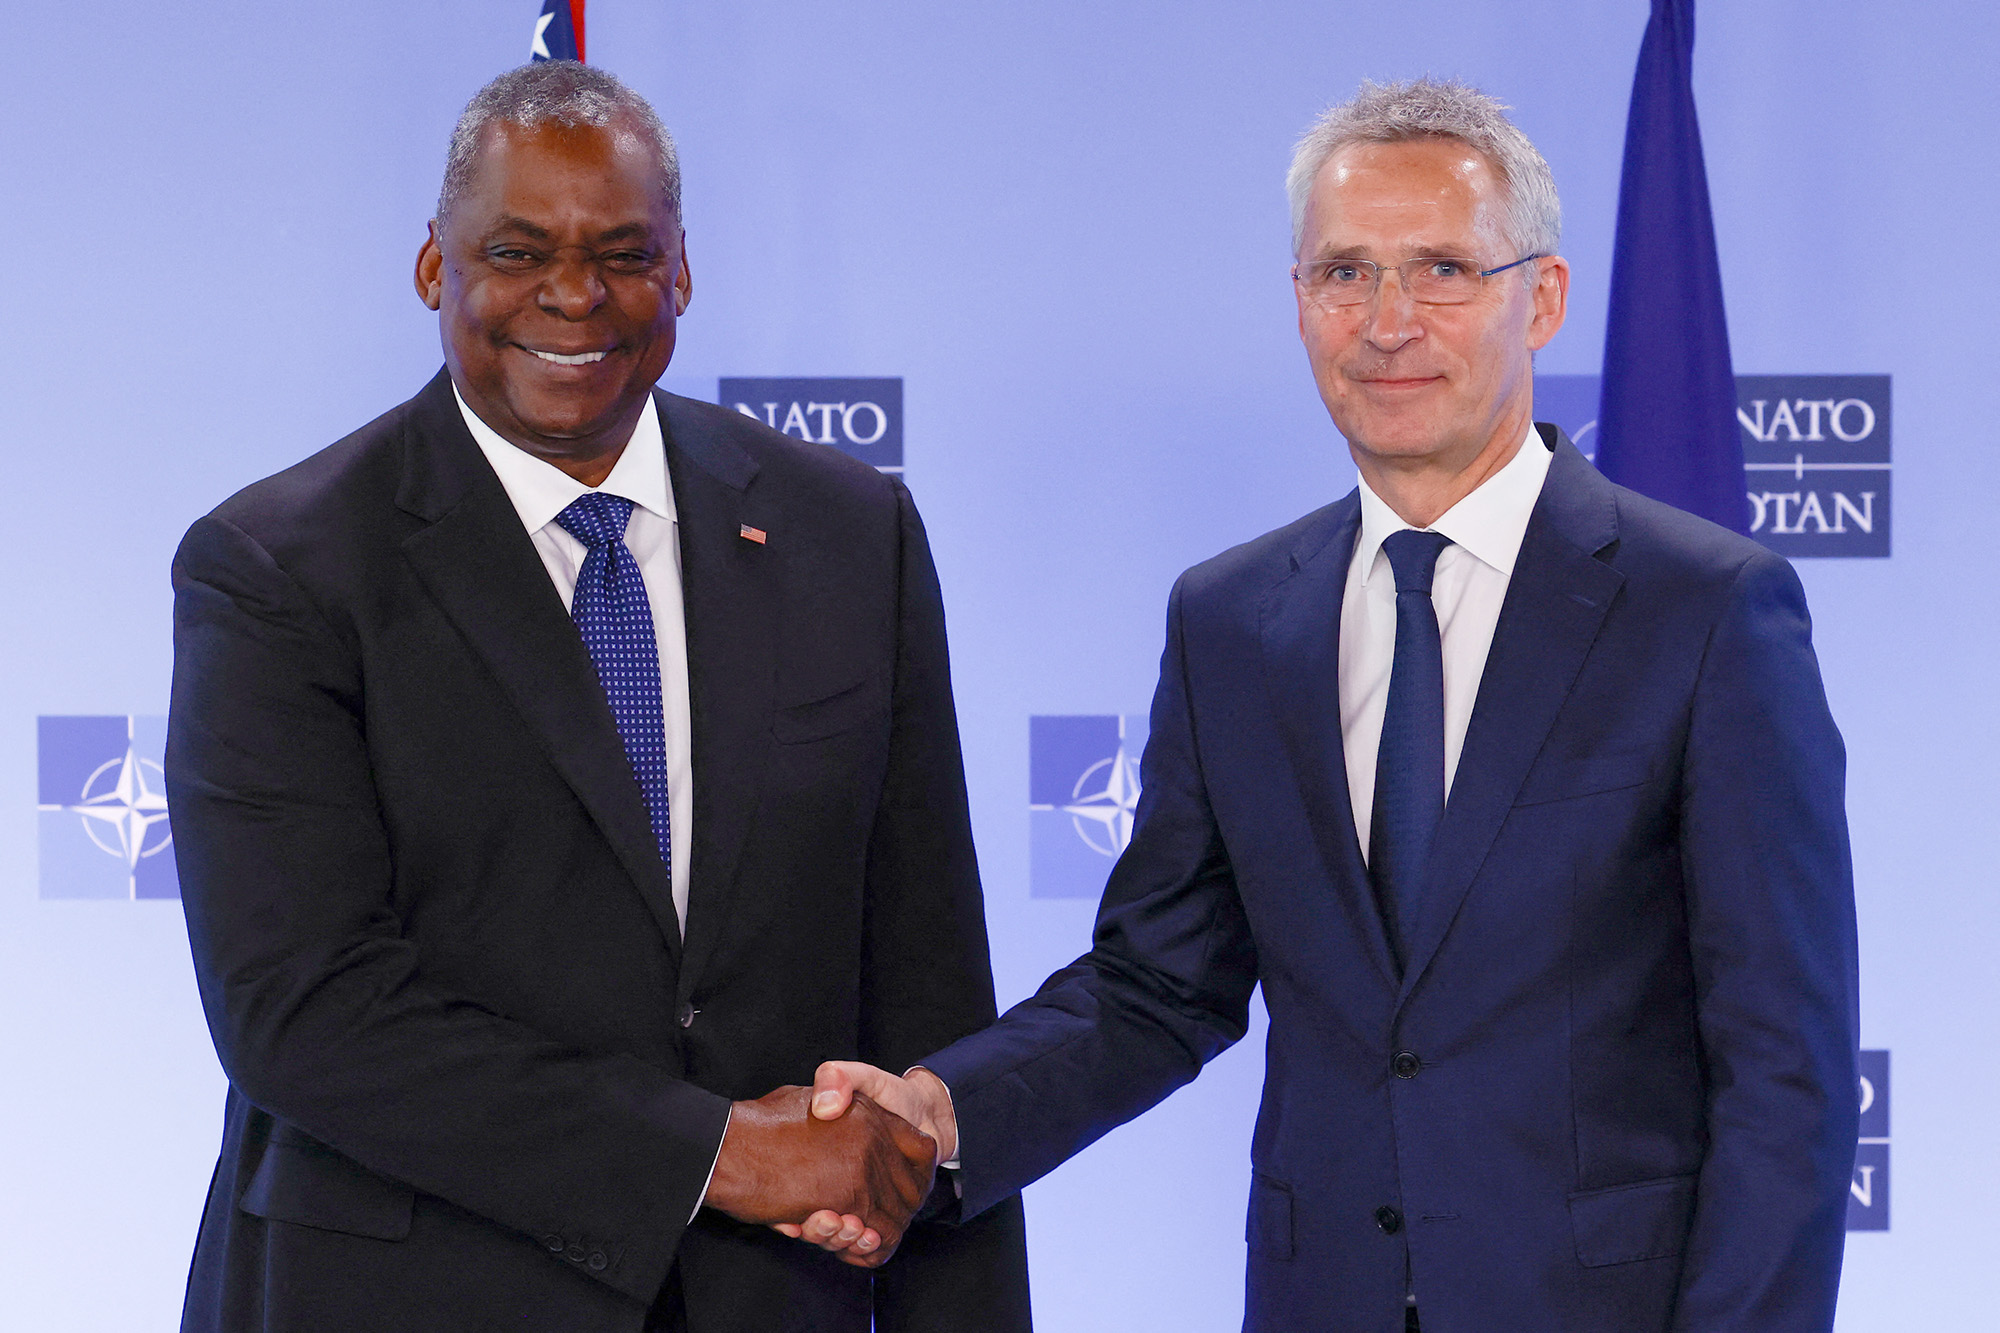 NATO Secretary General Jens Stoltenberg and U.S. Defense Secretary Lloyd Austin shake hands as they take part in a NATO defence ministers meeting at the Alliance's headquarters in Brussels, Belgium, on June 16.